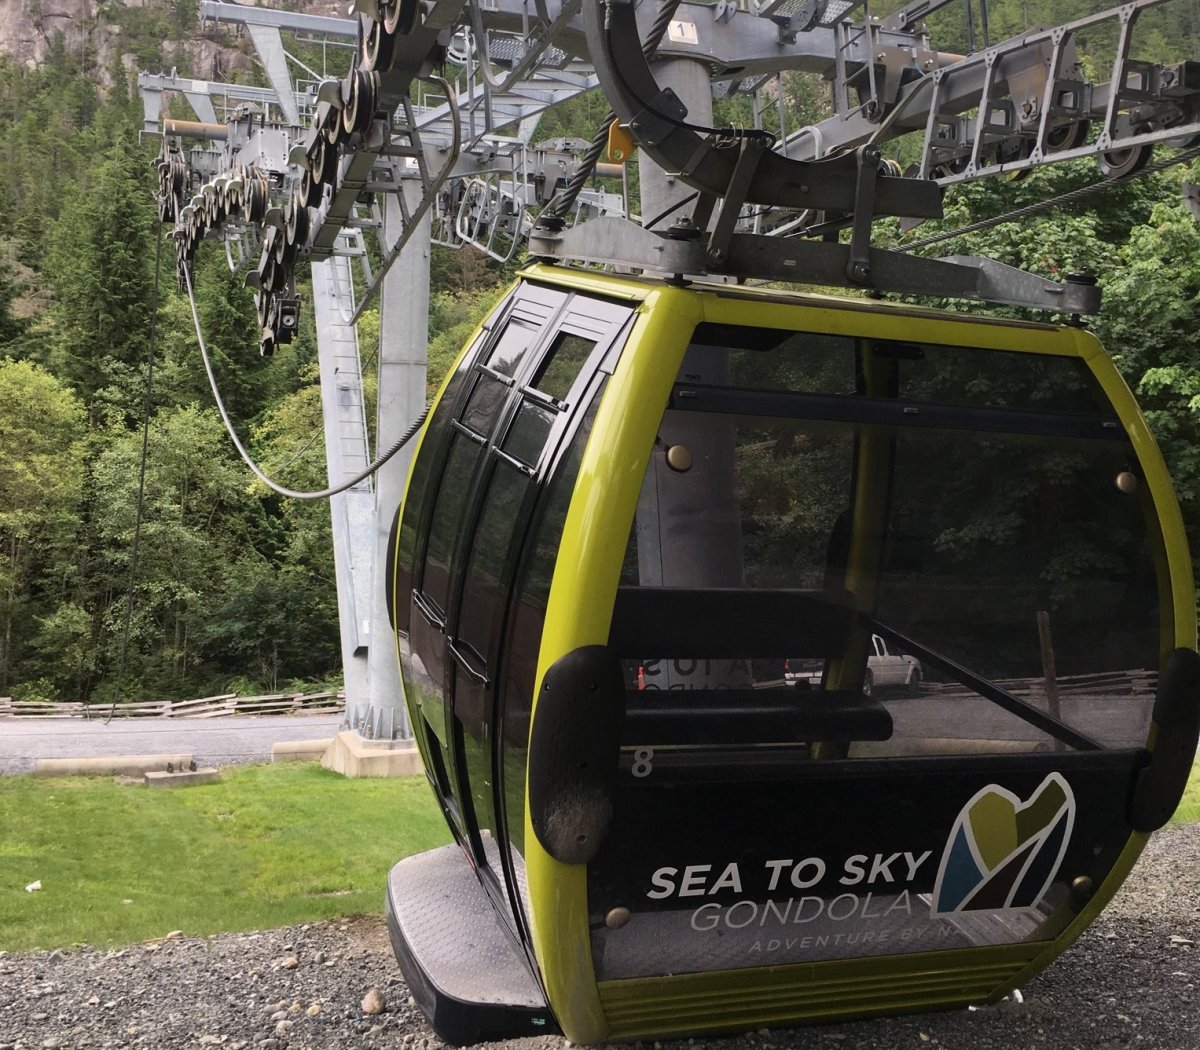 The Sea to Sky Gondola after its cable was deliberately cut on Aug. 10, 2019.